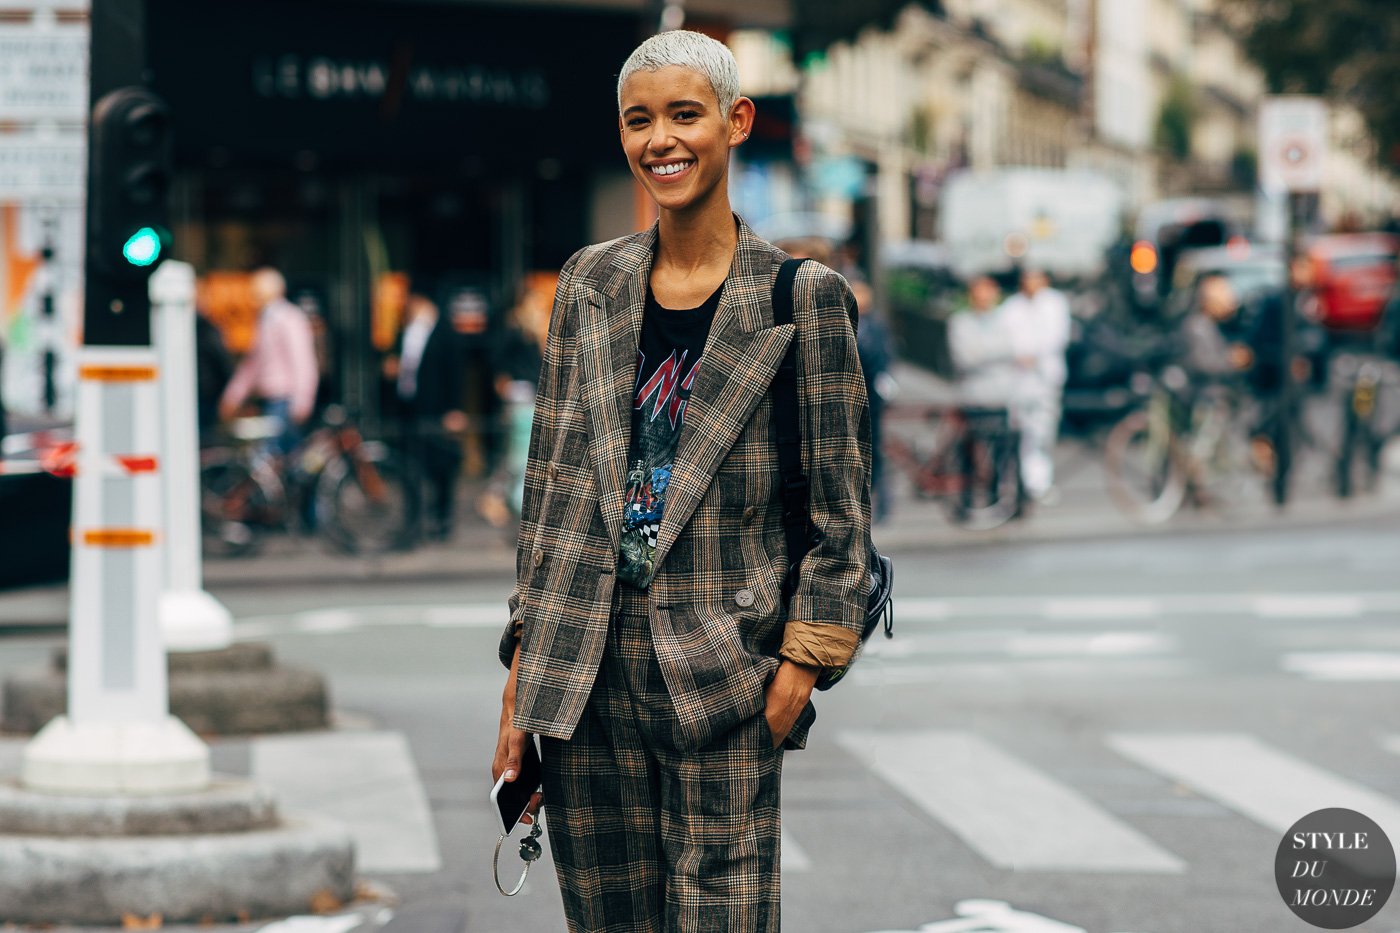 Dilone-by-STYLEDUMONDE-Street-Style-Fashion-Photography20180928_48A2999-Edit-2.jpg